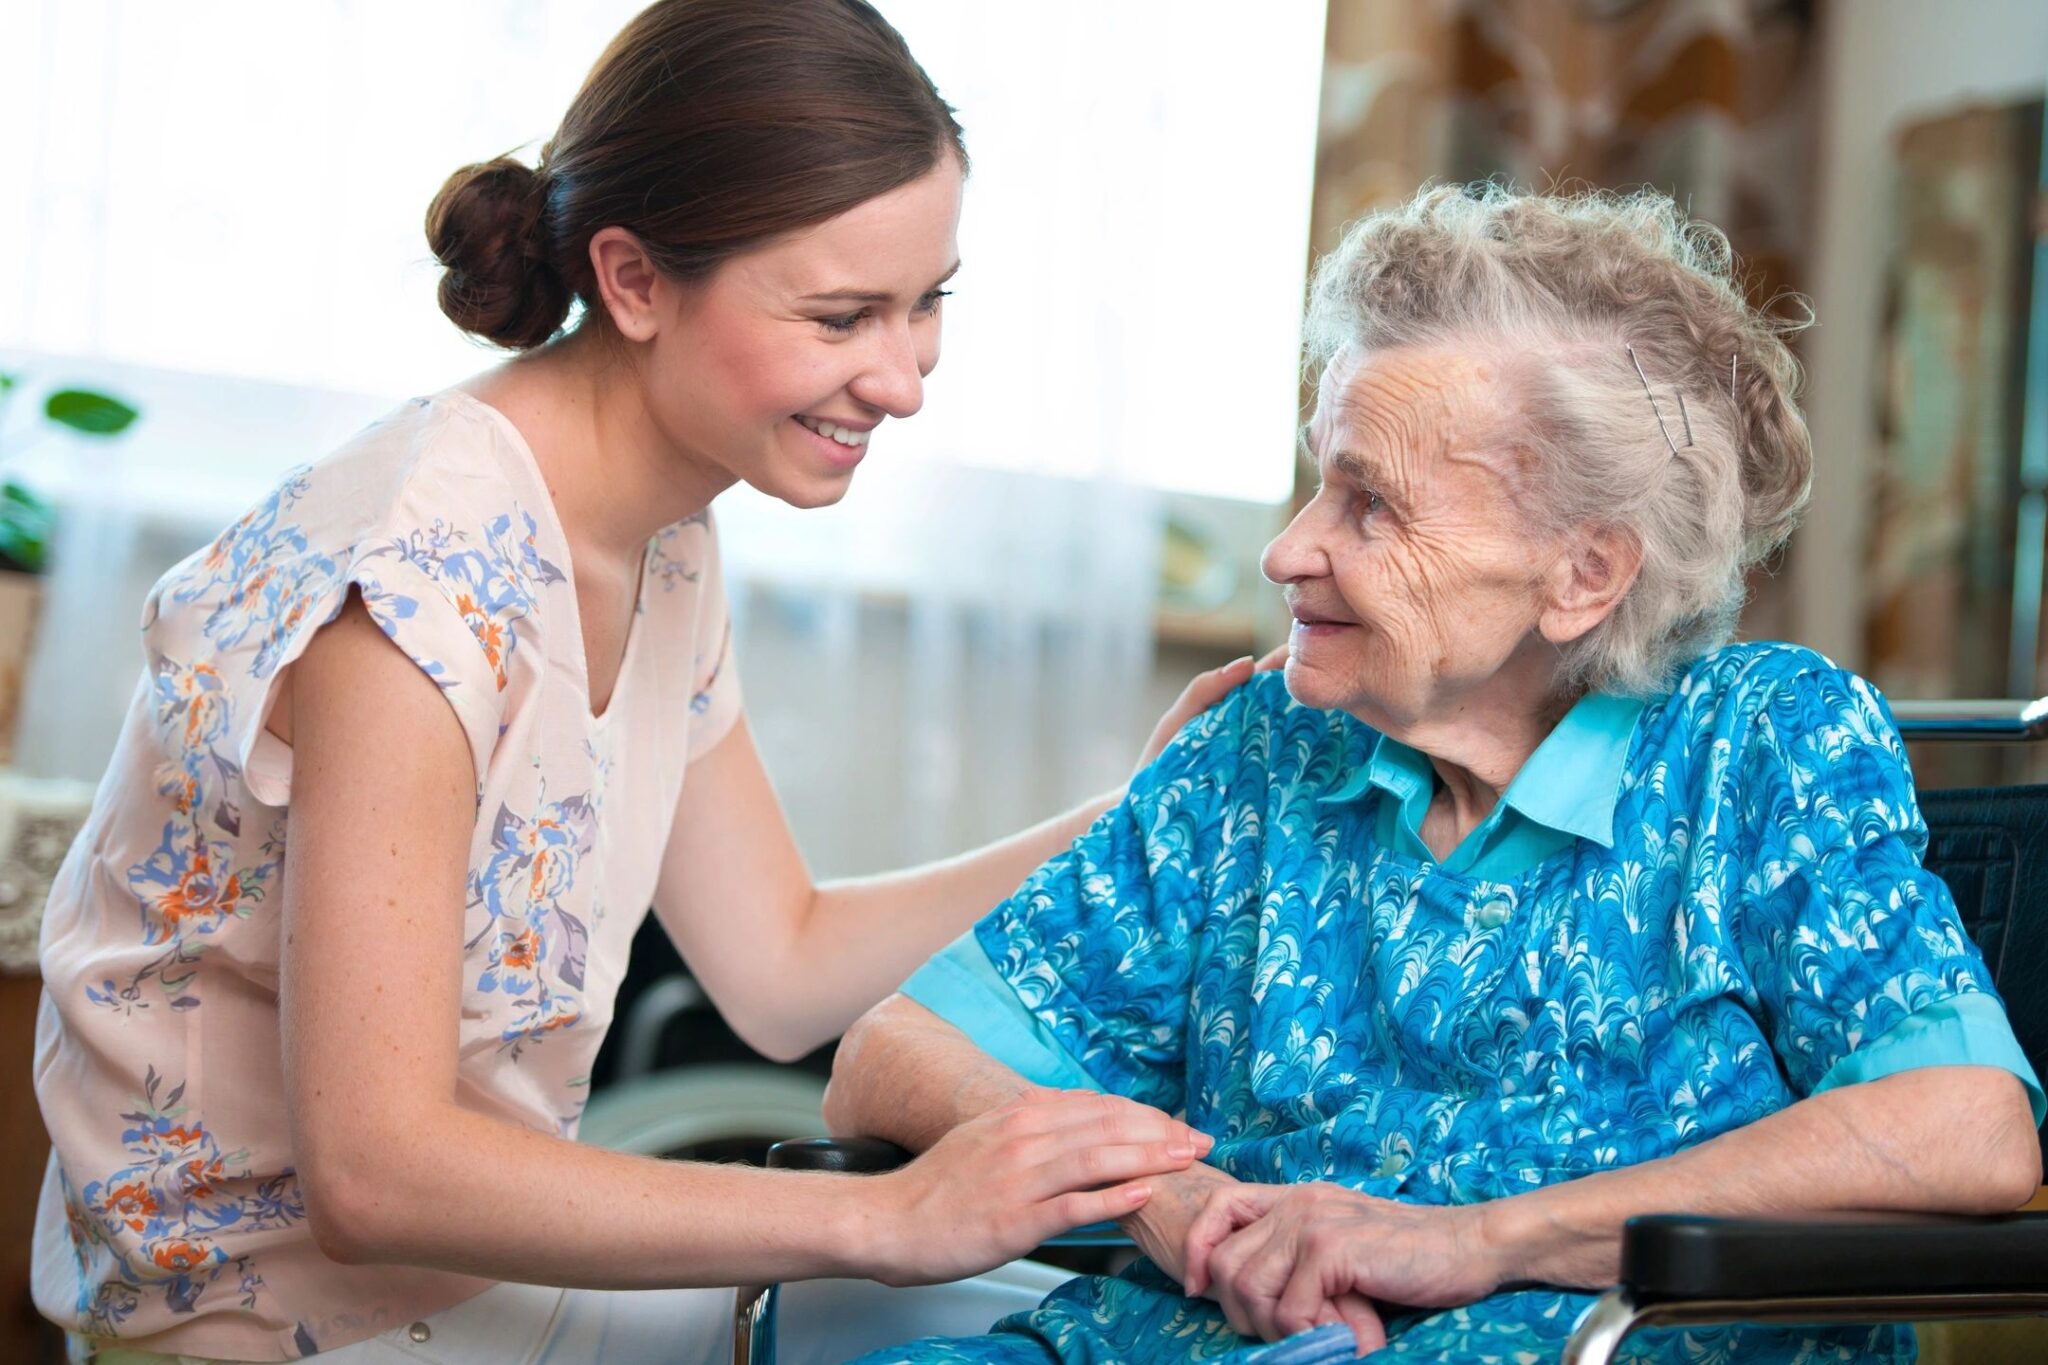 Care Managers ensure the safety of the elderly